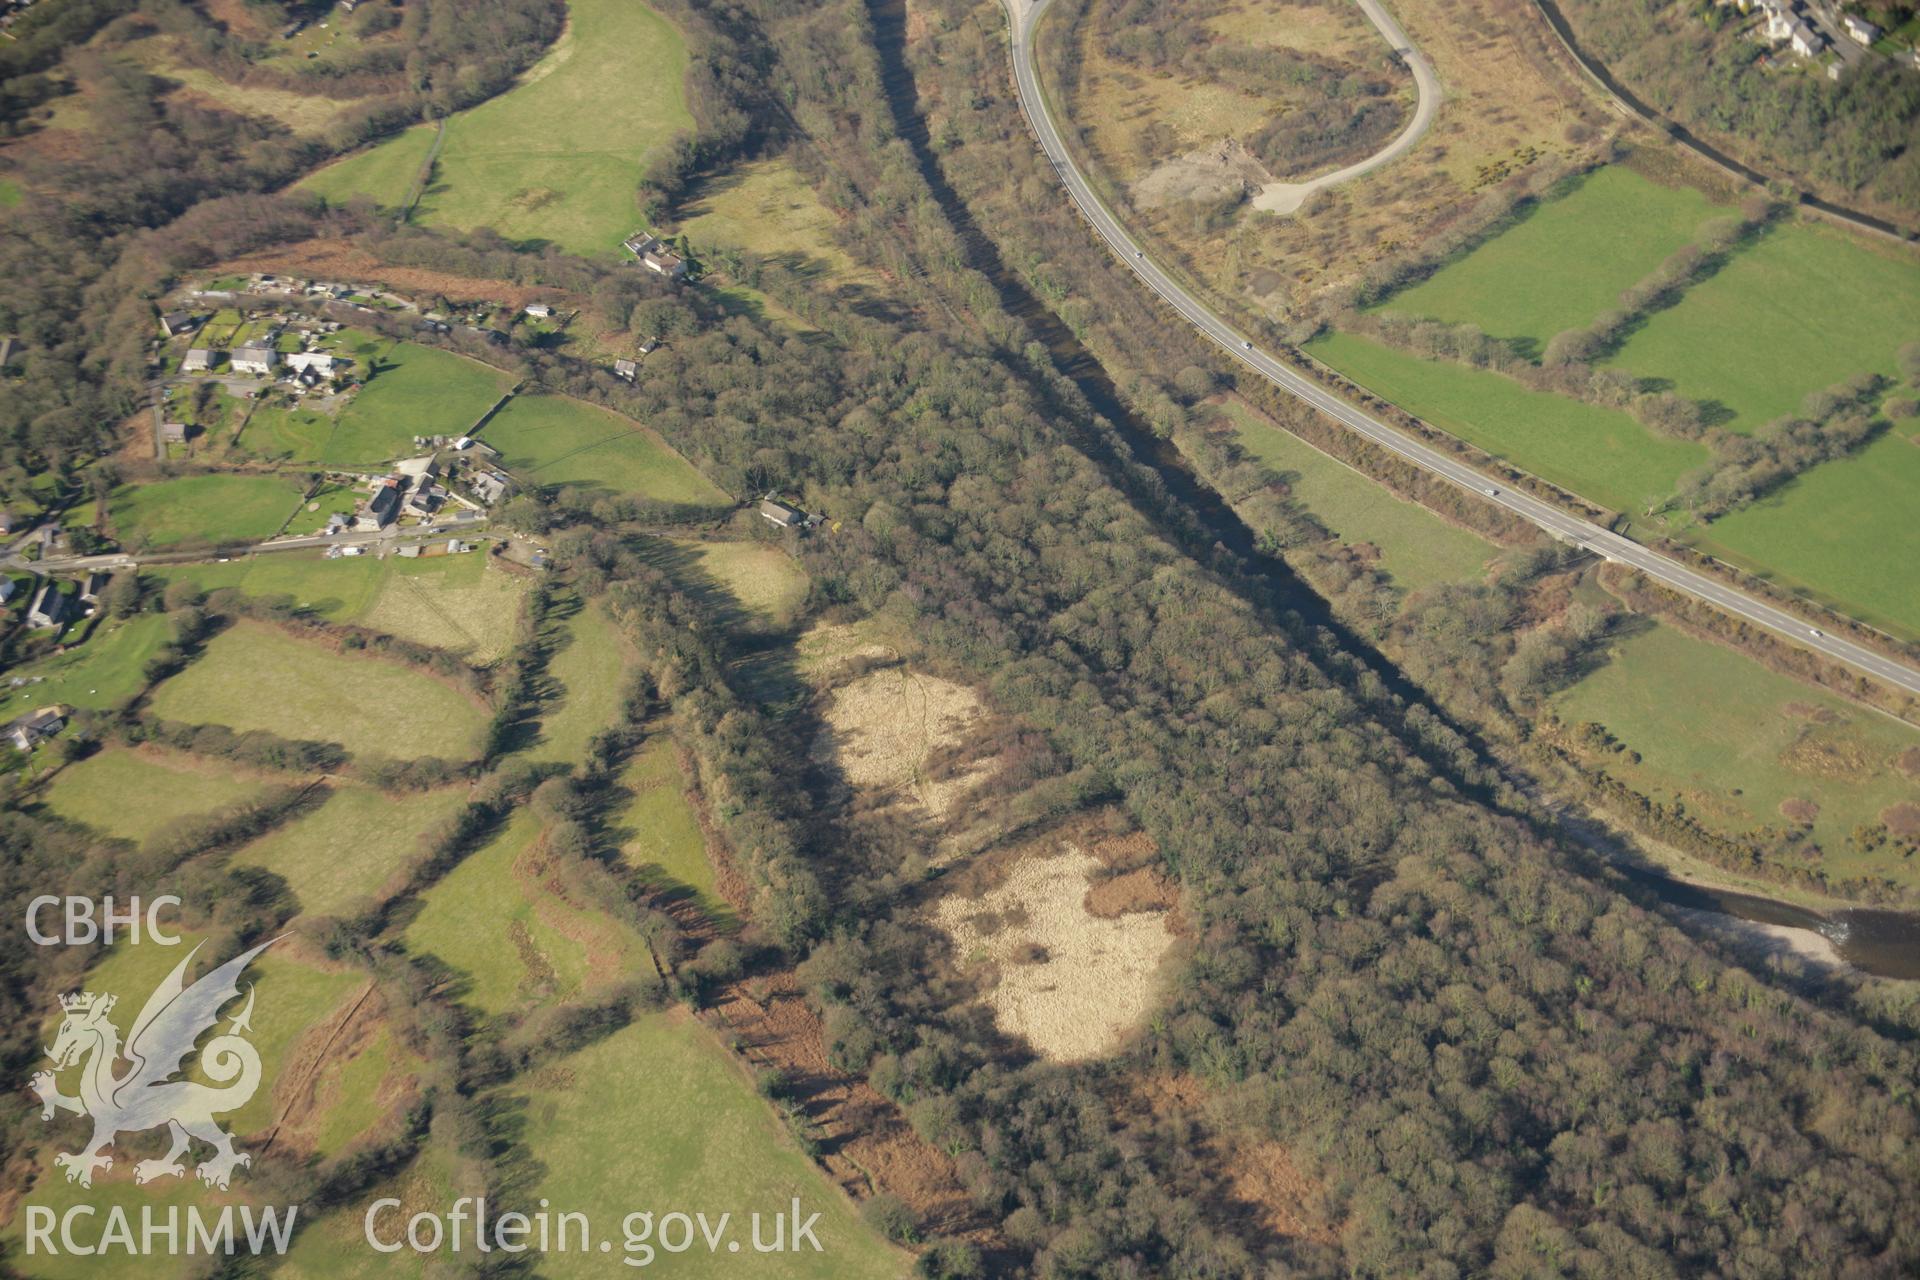 RCAHMW colour oblique aerial photograph of Ynyscedwyn Ironworks and Cwm-Nant-Llwyd Collieries Railway, Swansea Canal. Taken on 21 March 2007 by Toby Driver